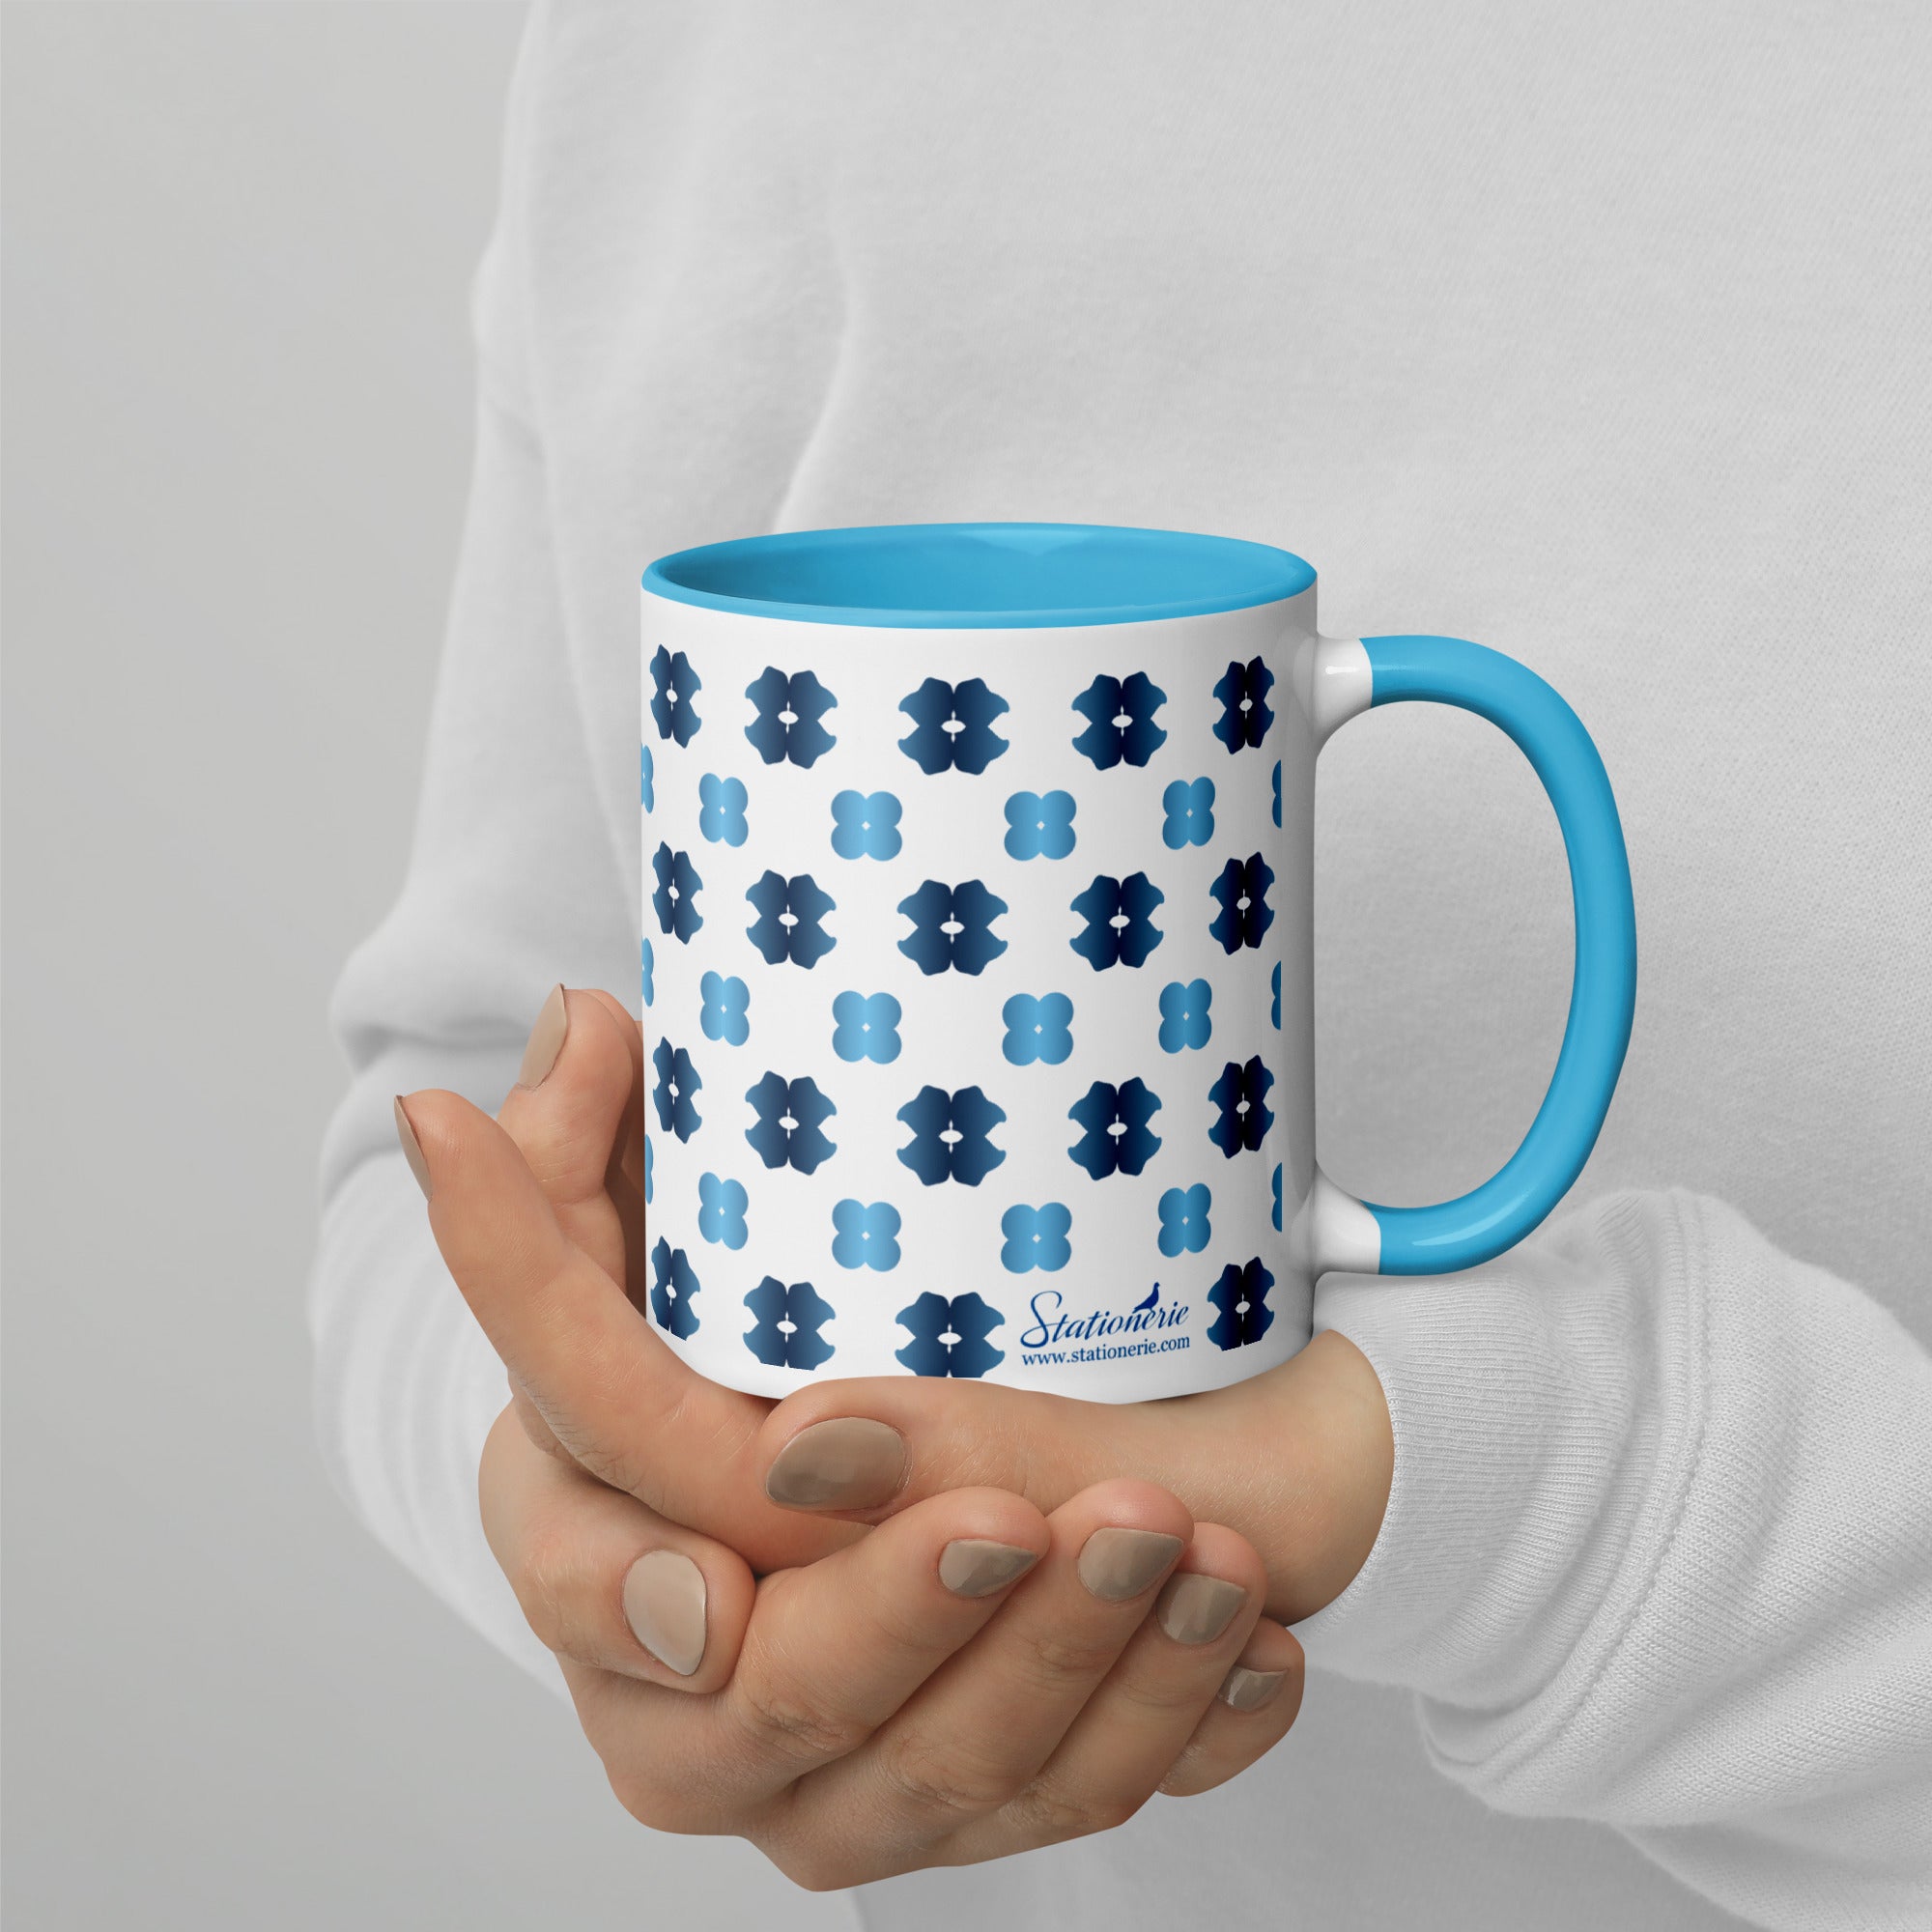 Pack of 4 Ceramic Mugs - Rorschach’s Flowers in Blue